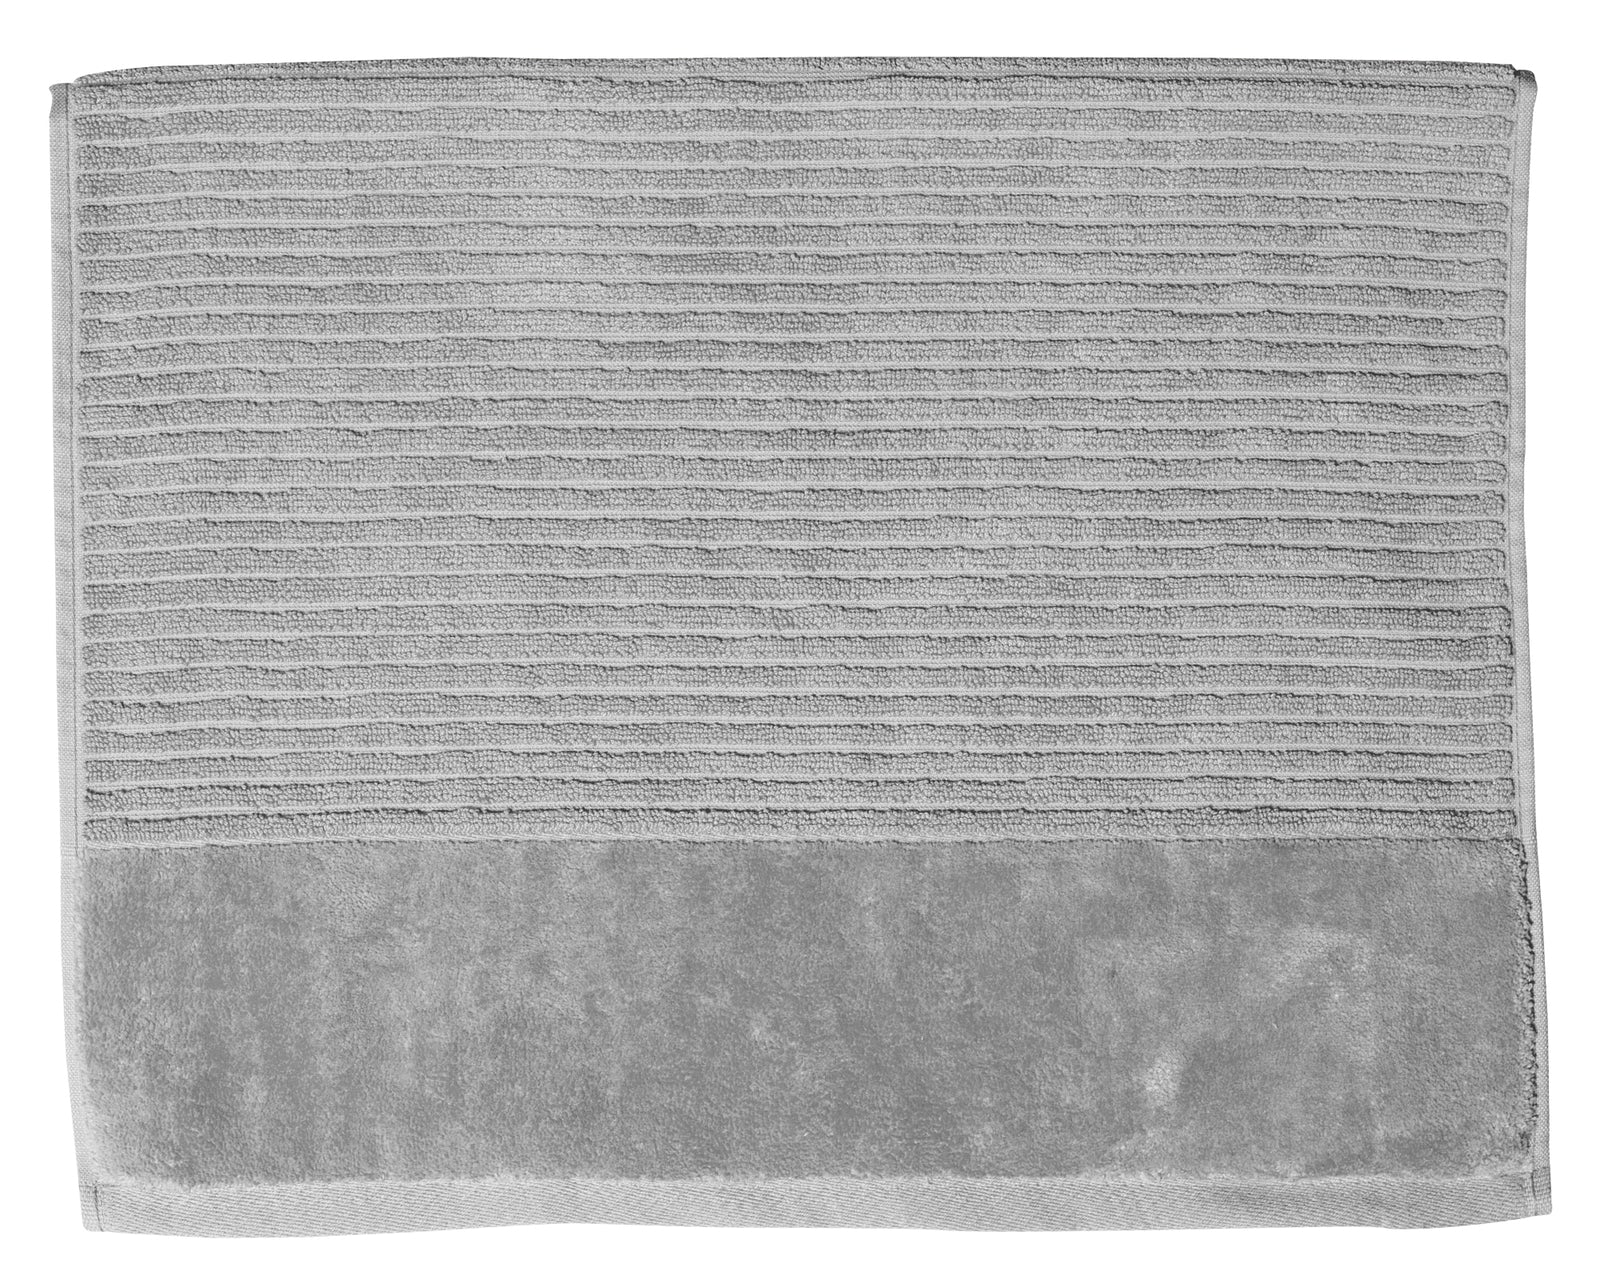 Jenny Mclean Royal Excellency Bath Mats 2 ply sheared Border 1100GSM in Silver